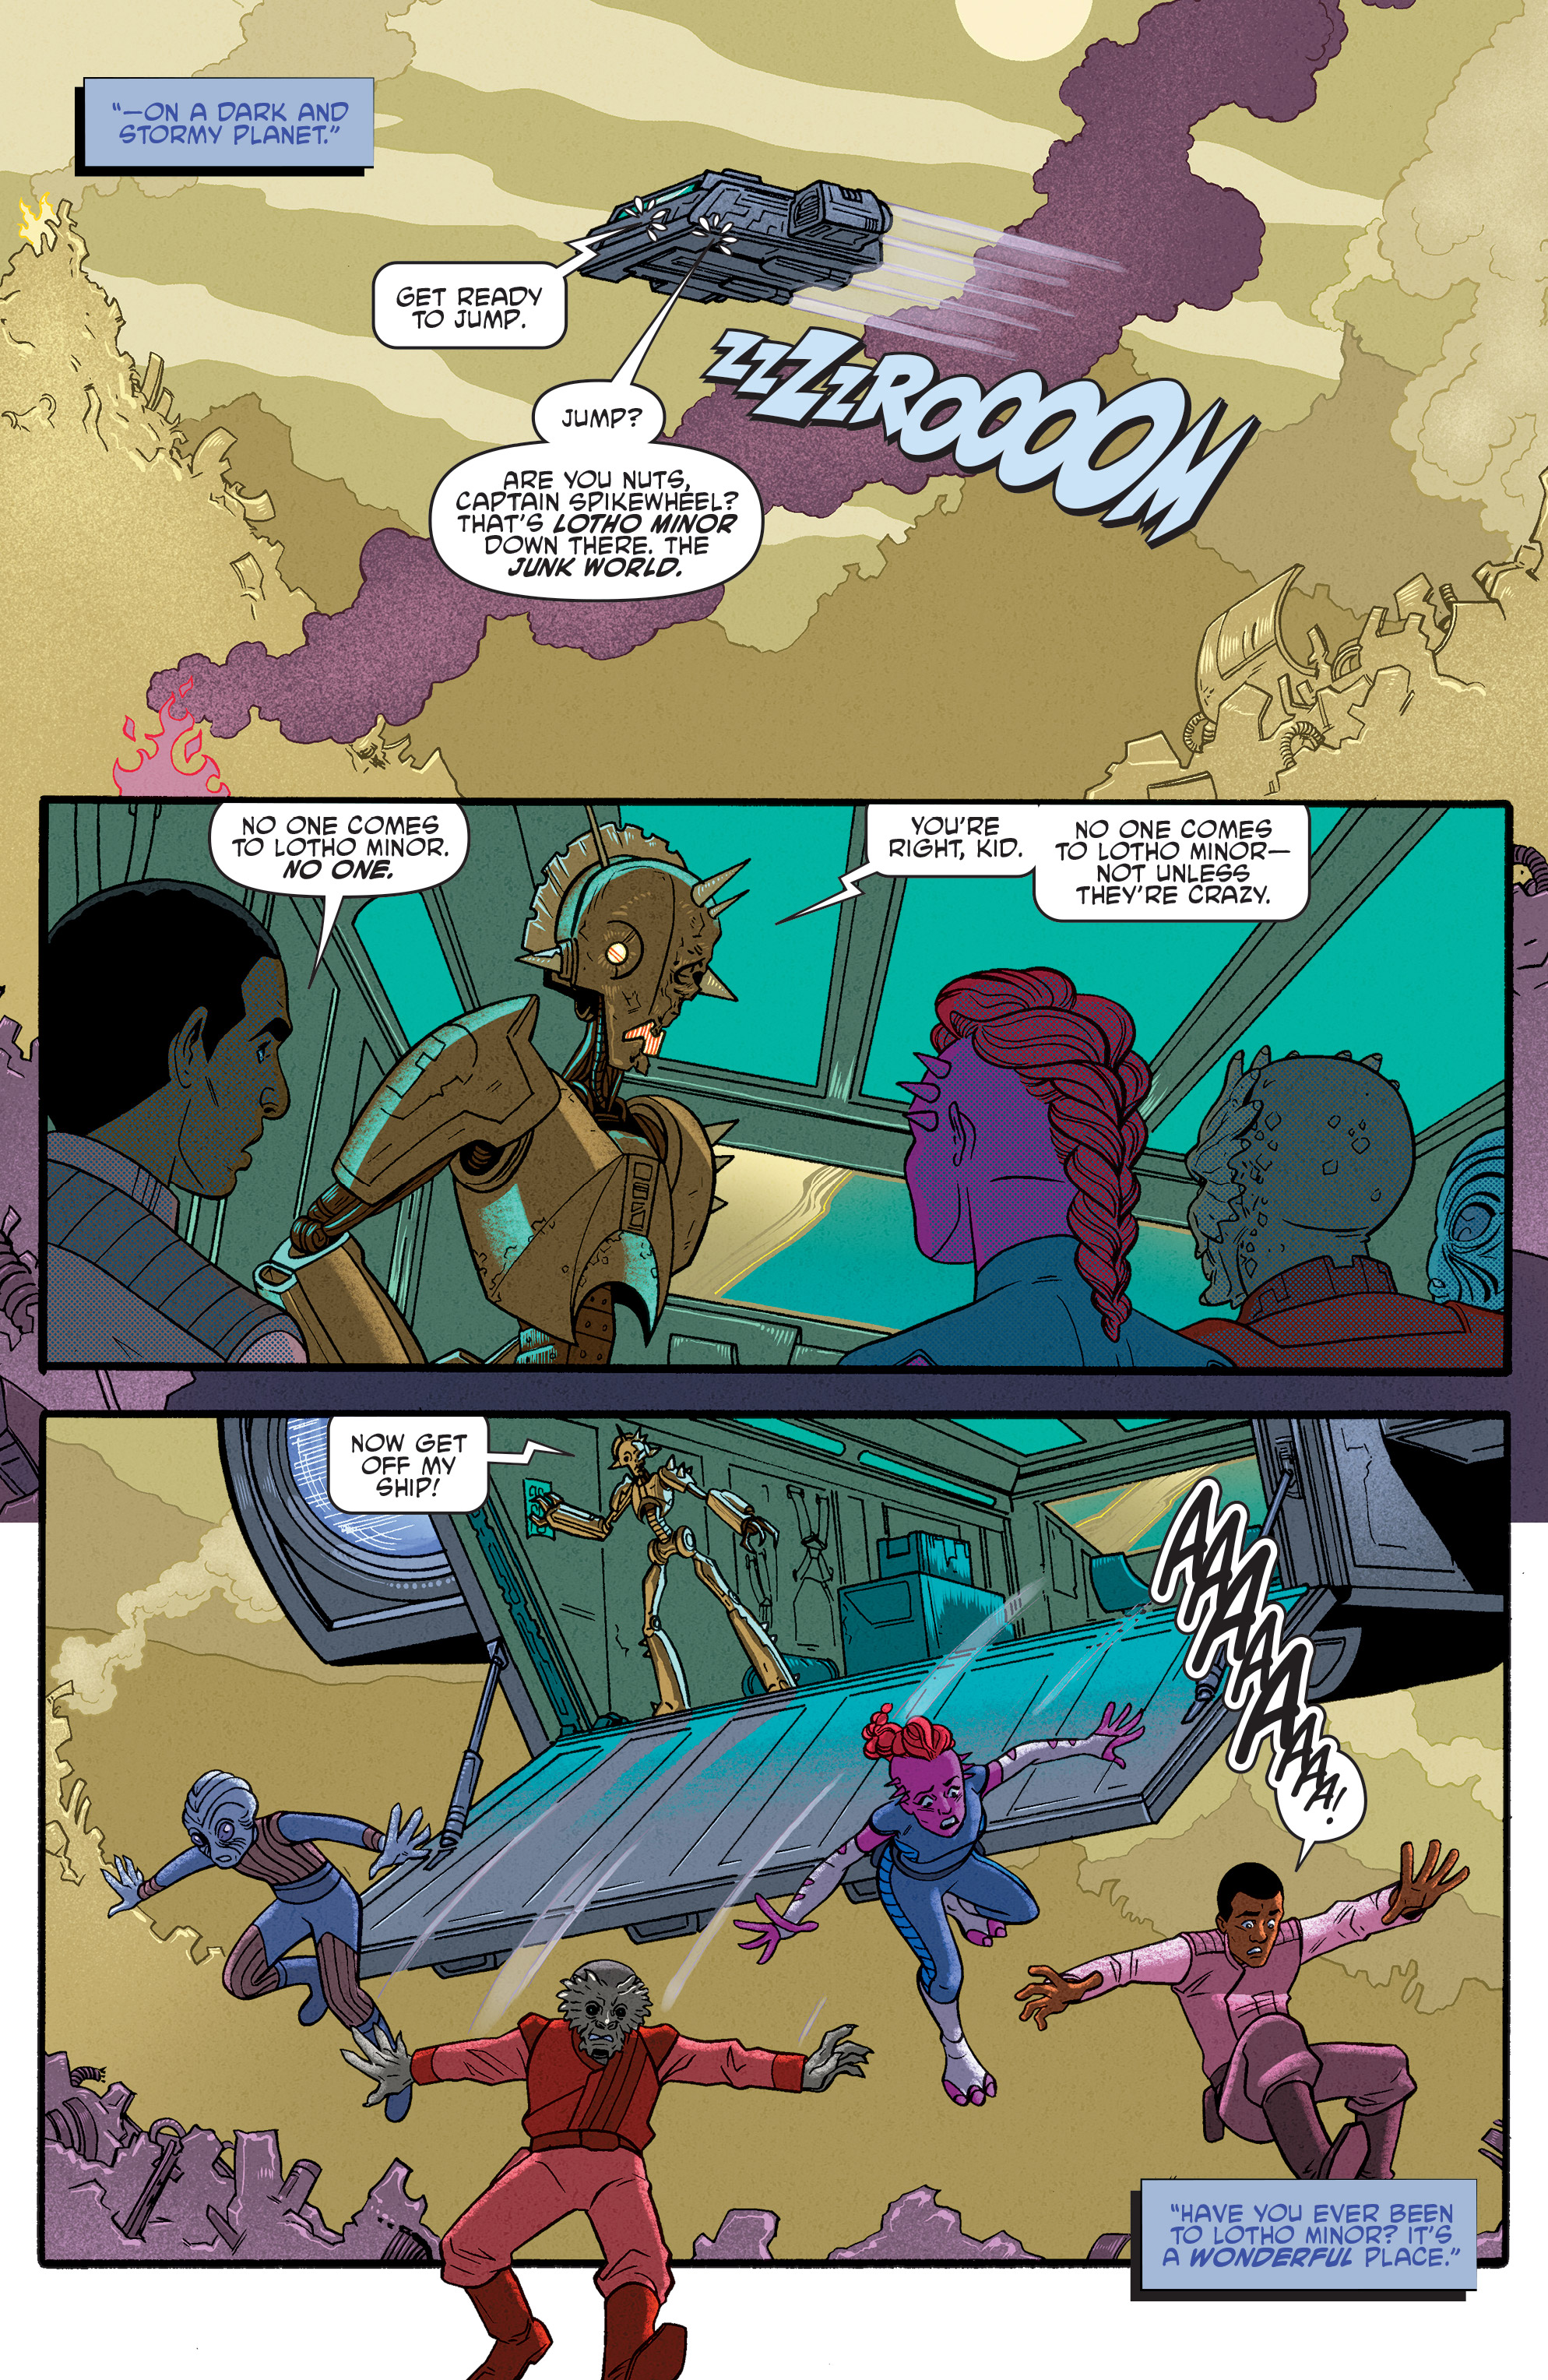 Star Wars Adventures: Return to Vader’s Castle (2019-): Chapter 1 - Page 5